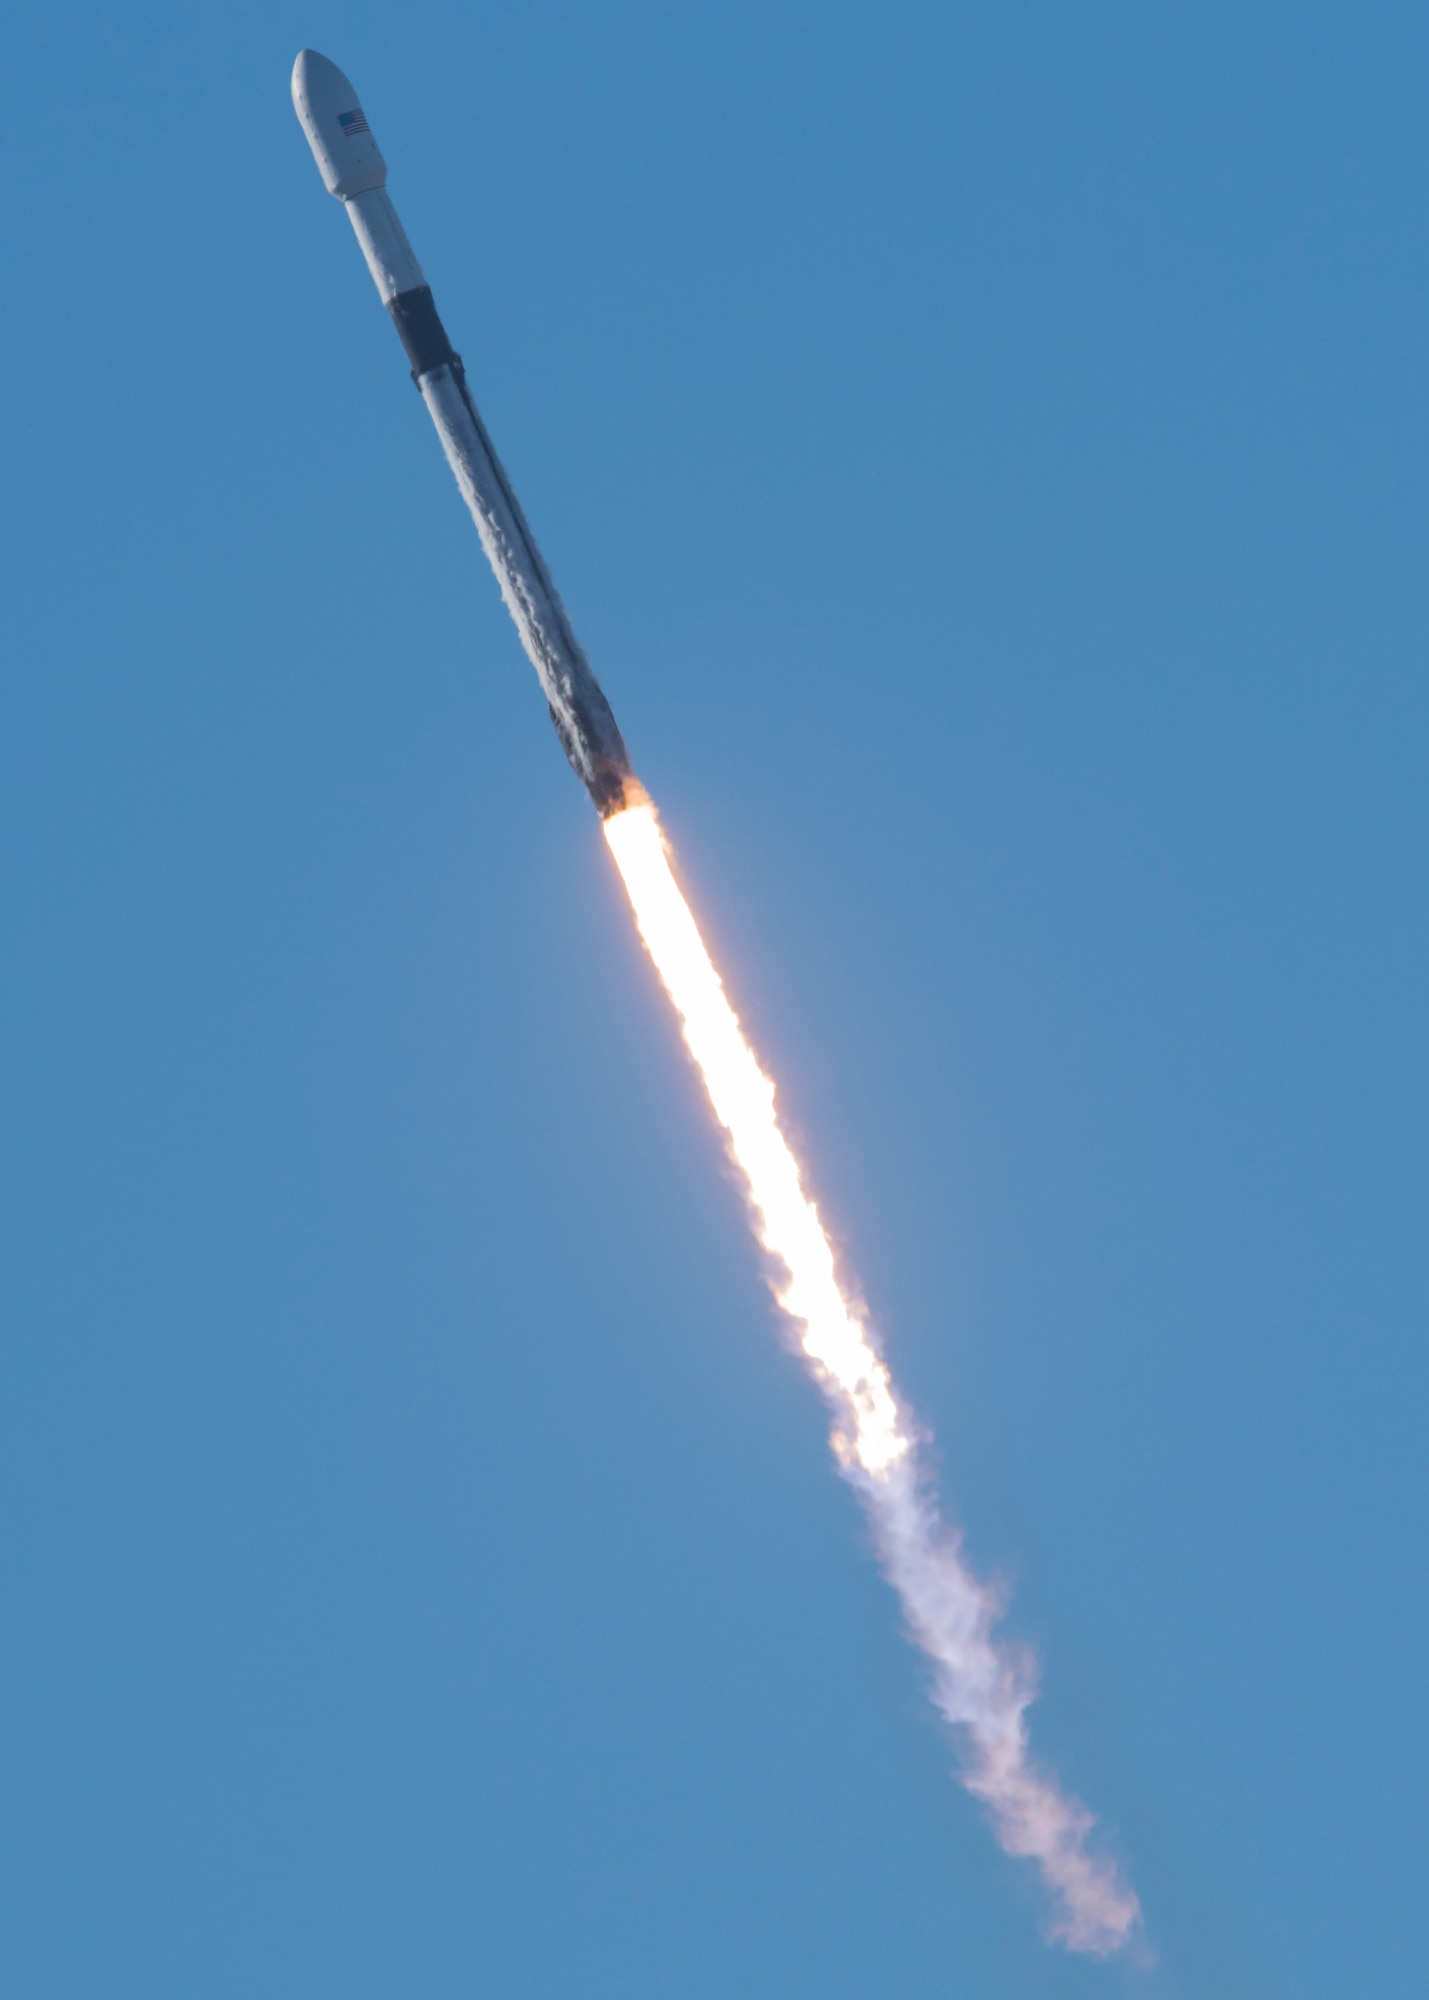 A SpaceX Falcon 9 rocket, carrying the Spaceflight SSO-A: SmallSat Express, launches from Space Launch Complex-4E at Vandenberg Air Force Base, CA, on Dec. 3, 2018 at 10:34 a.m. PST. (U.S. Air Force photo by Senior Airman Clayton Wear/Released)